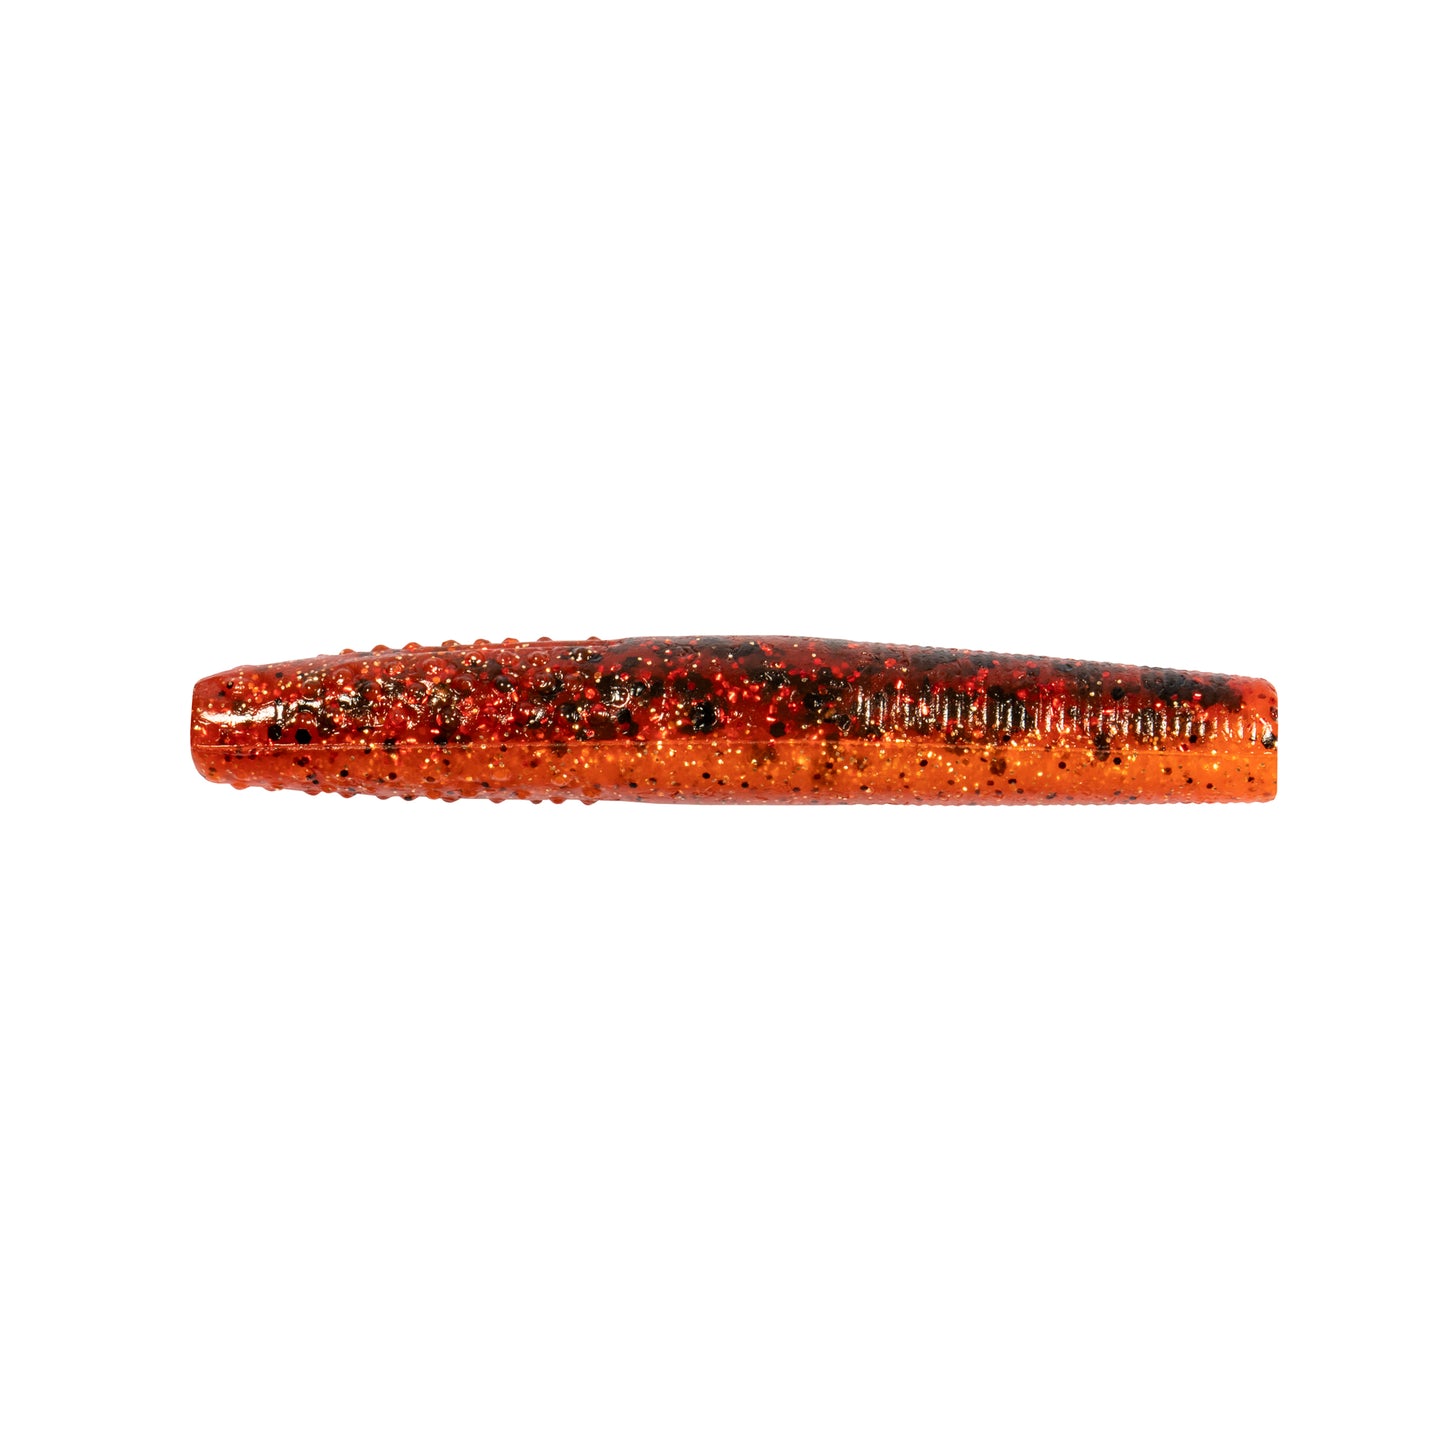 Z-Man FINESSE TRD 2.75" FIRE CRAW 8 PACK